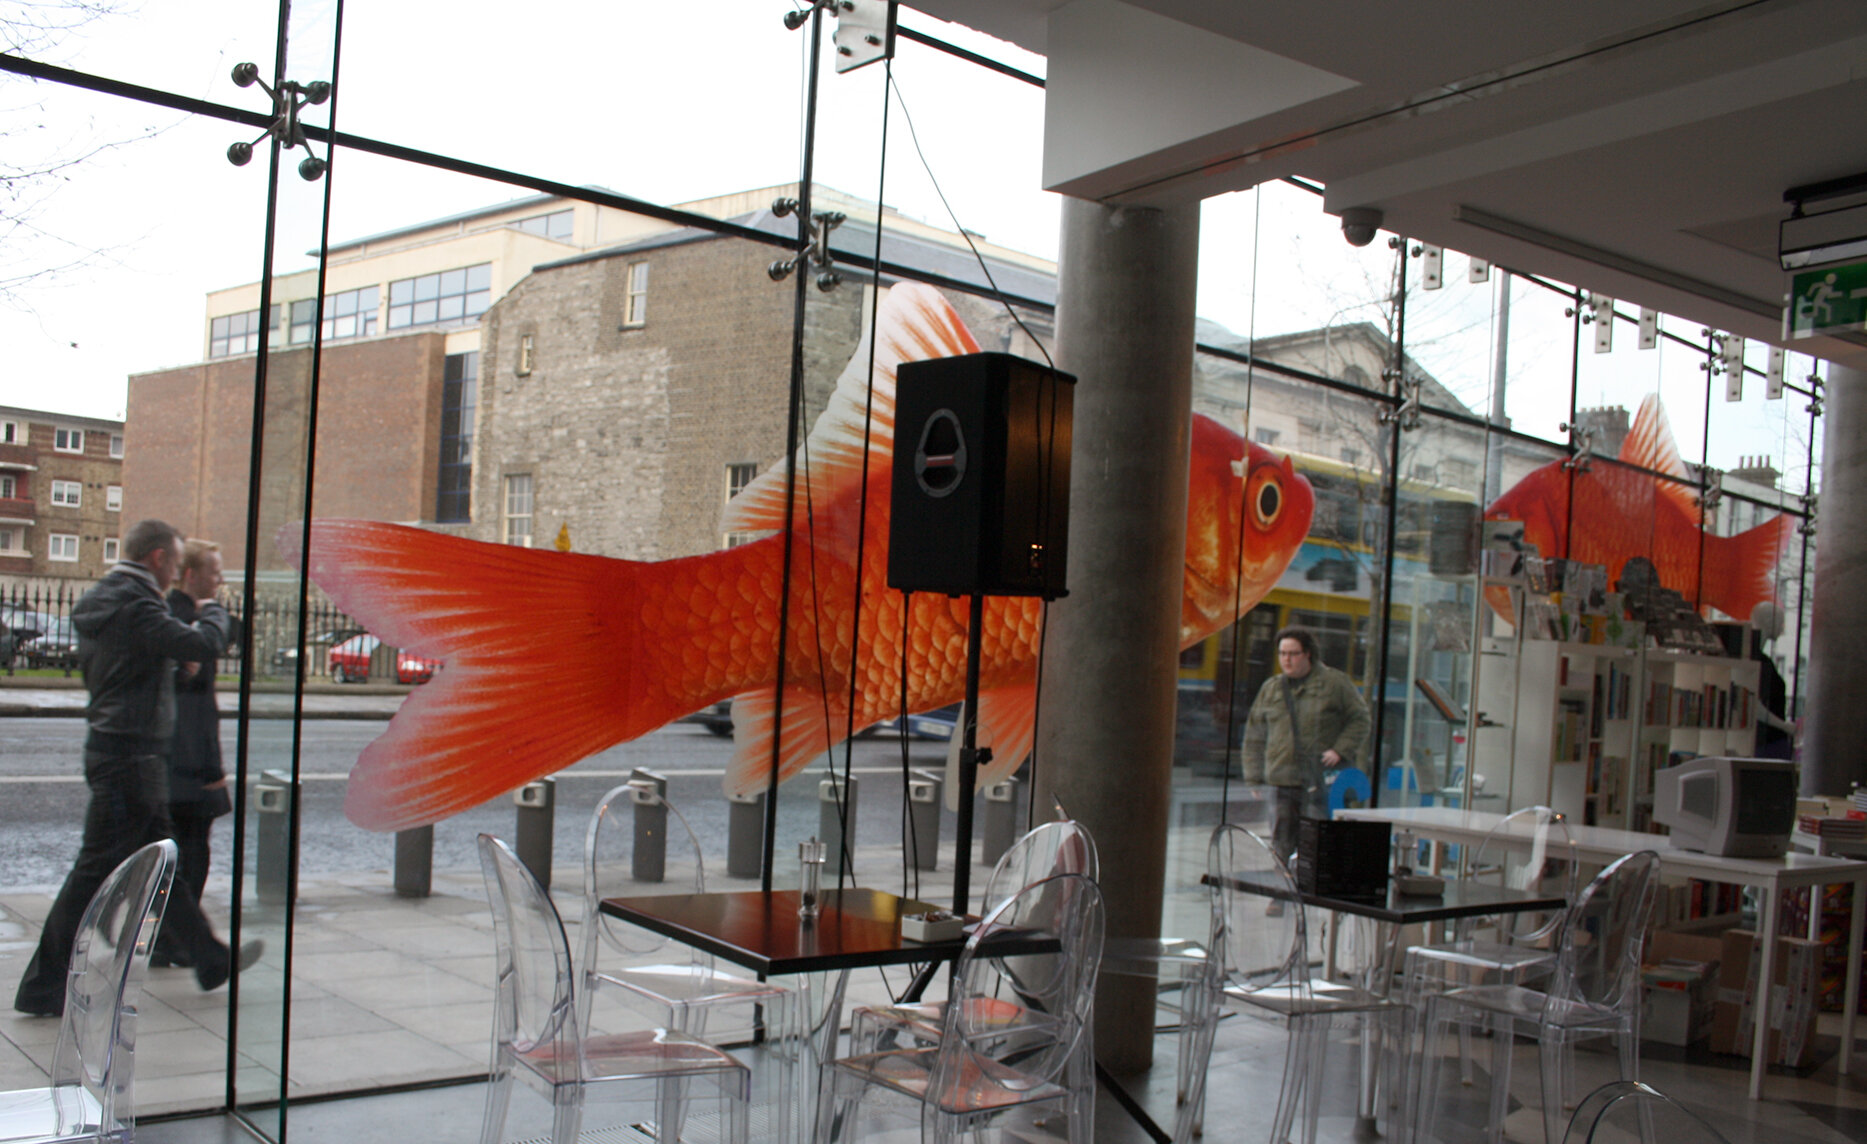 Gold fish image as a lead visual for the exhibition Memory Lab